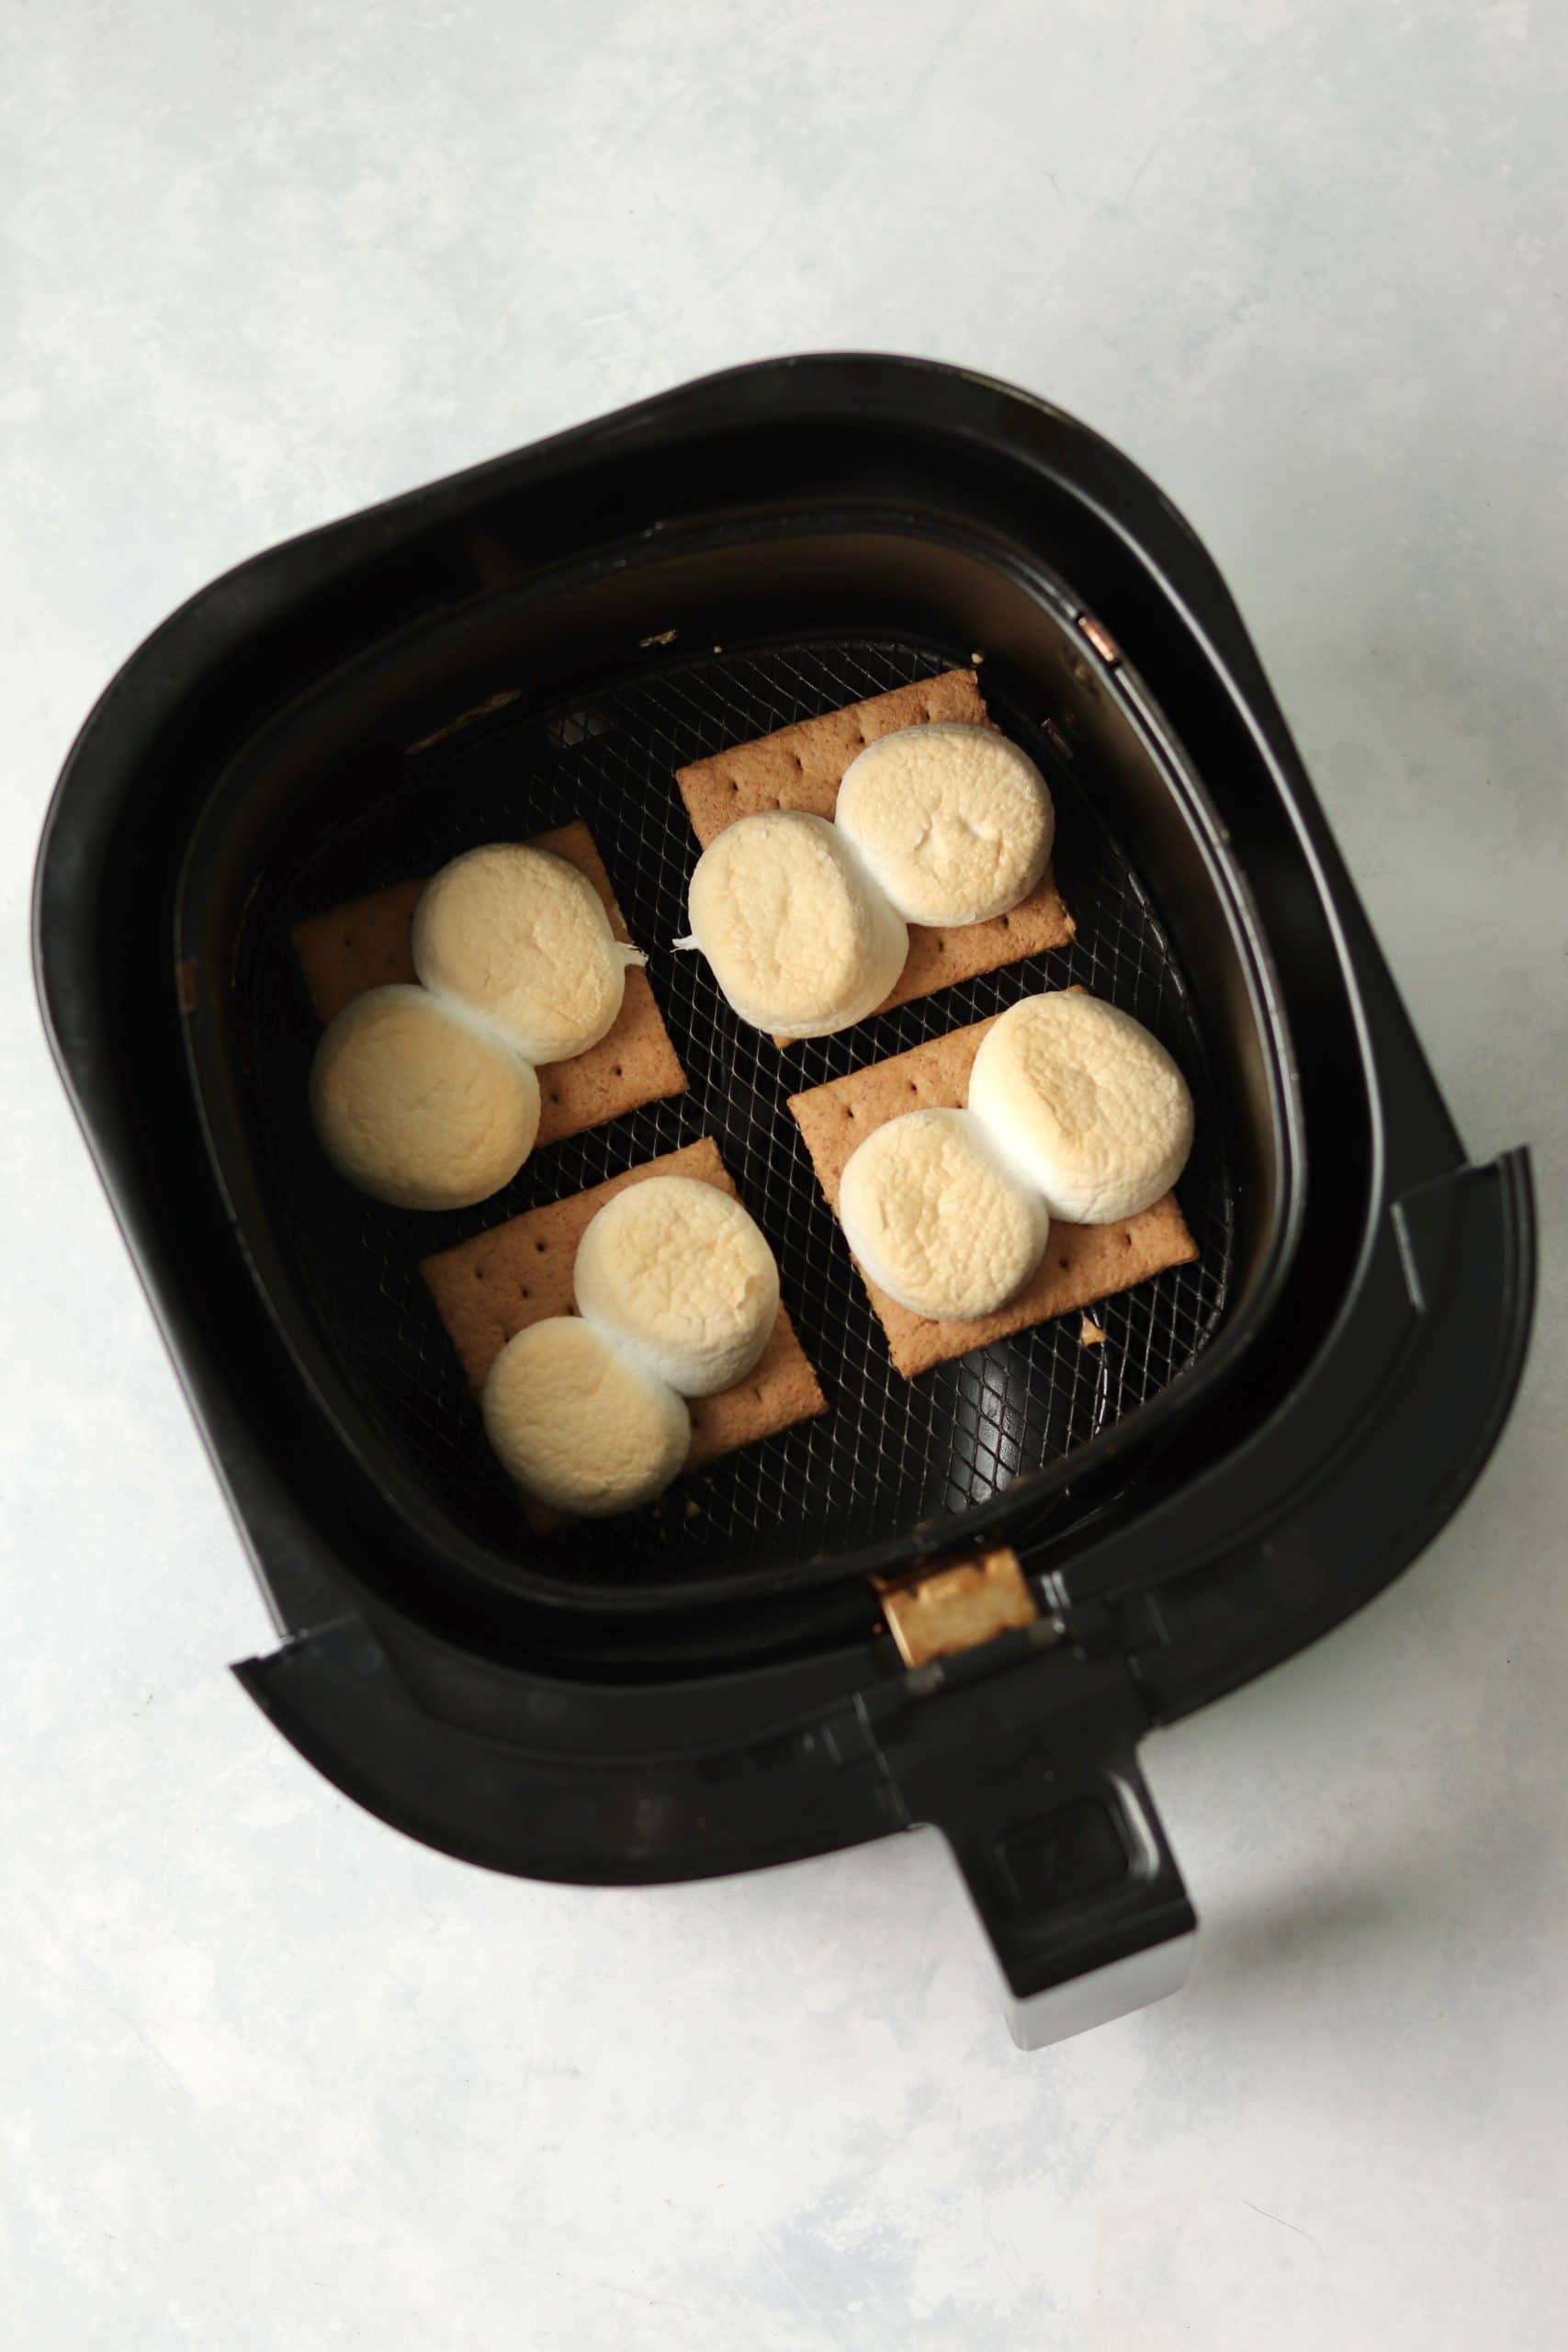 toasted marshmallows on graham crackers in air fryer basket.